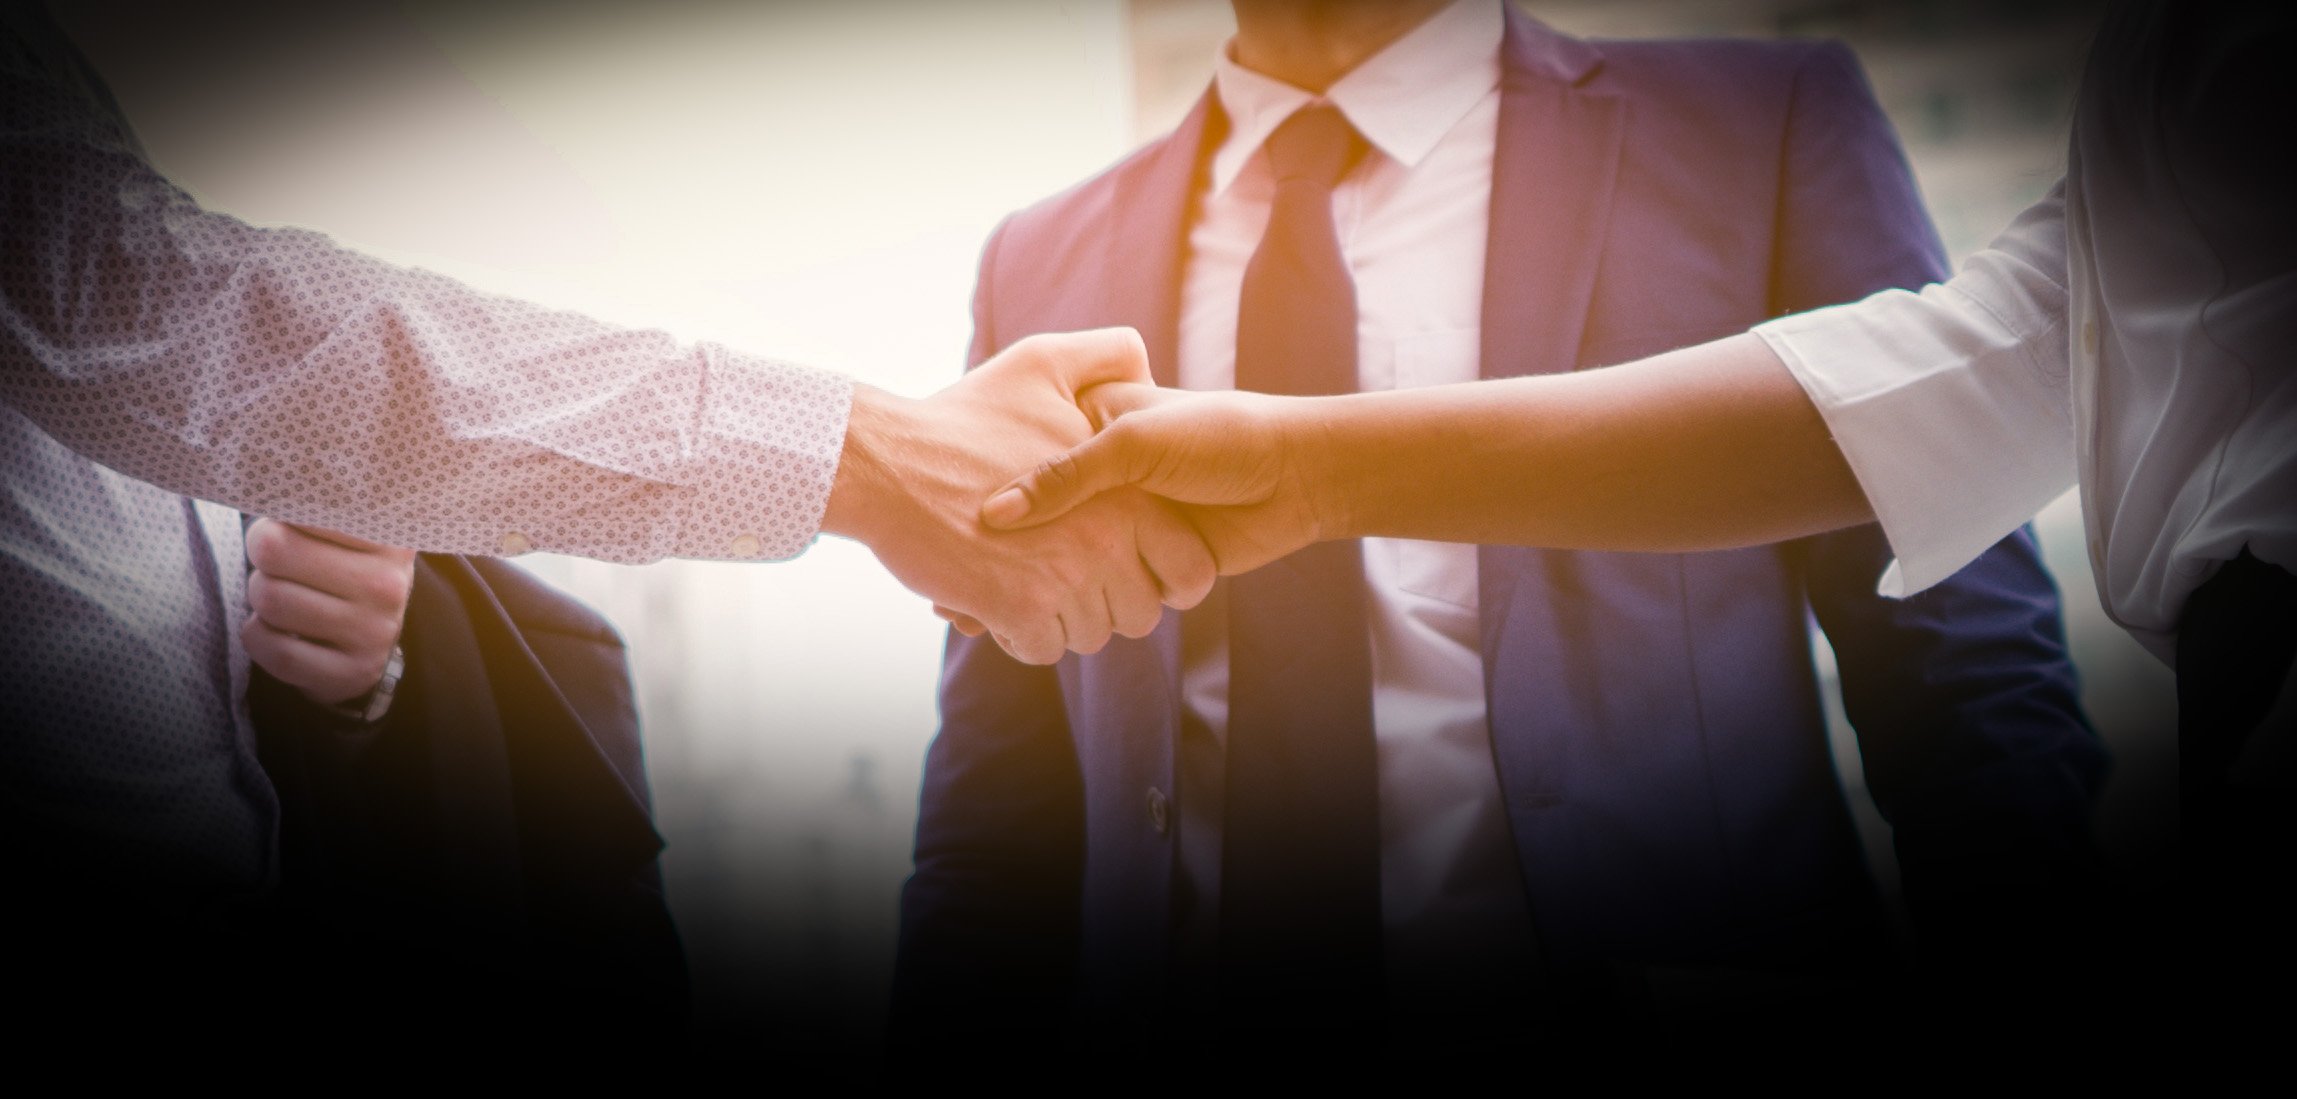 Image of people in business attire shaking hands